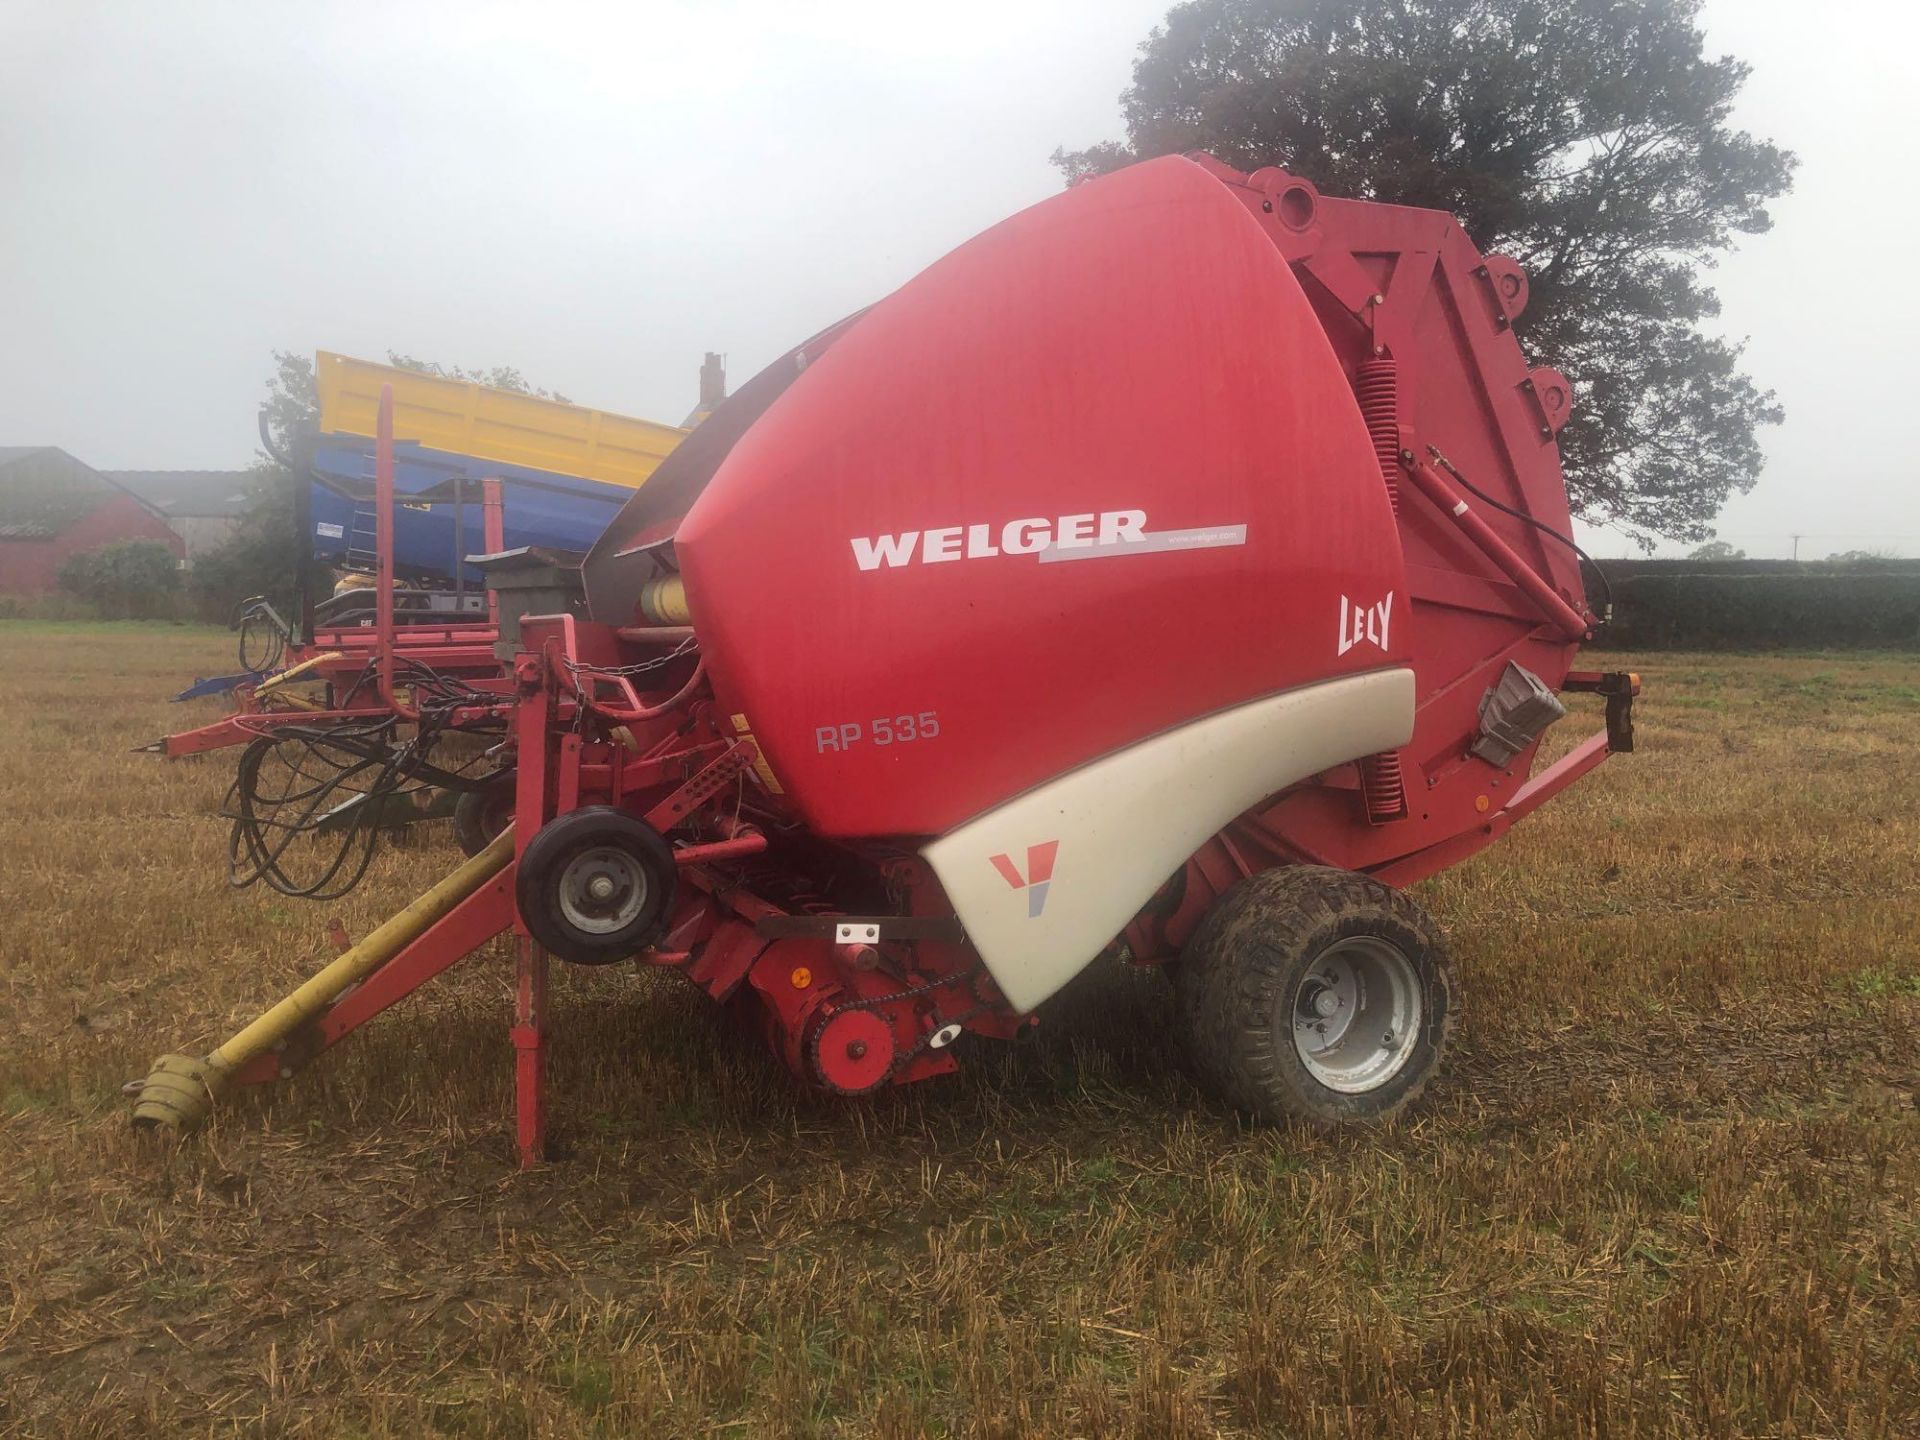 2007 Welger RP535 round baler. Variable chamber belt. Bale count showing: 77,771. Bale counter in of - Image 3 of 4